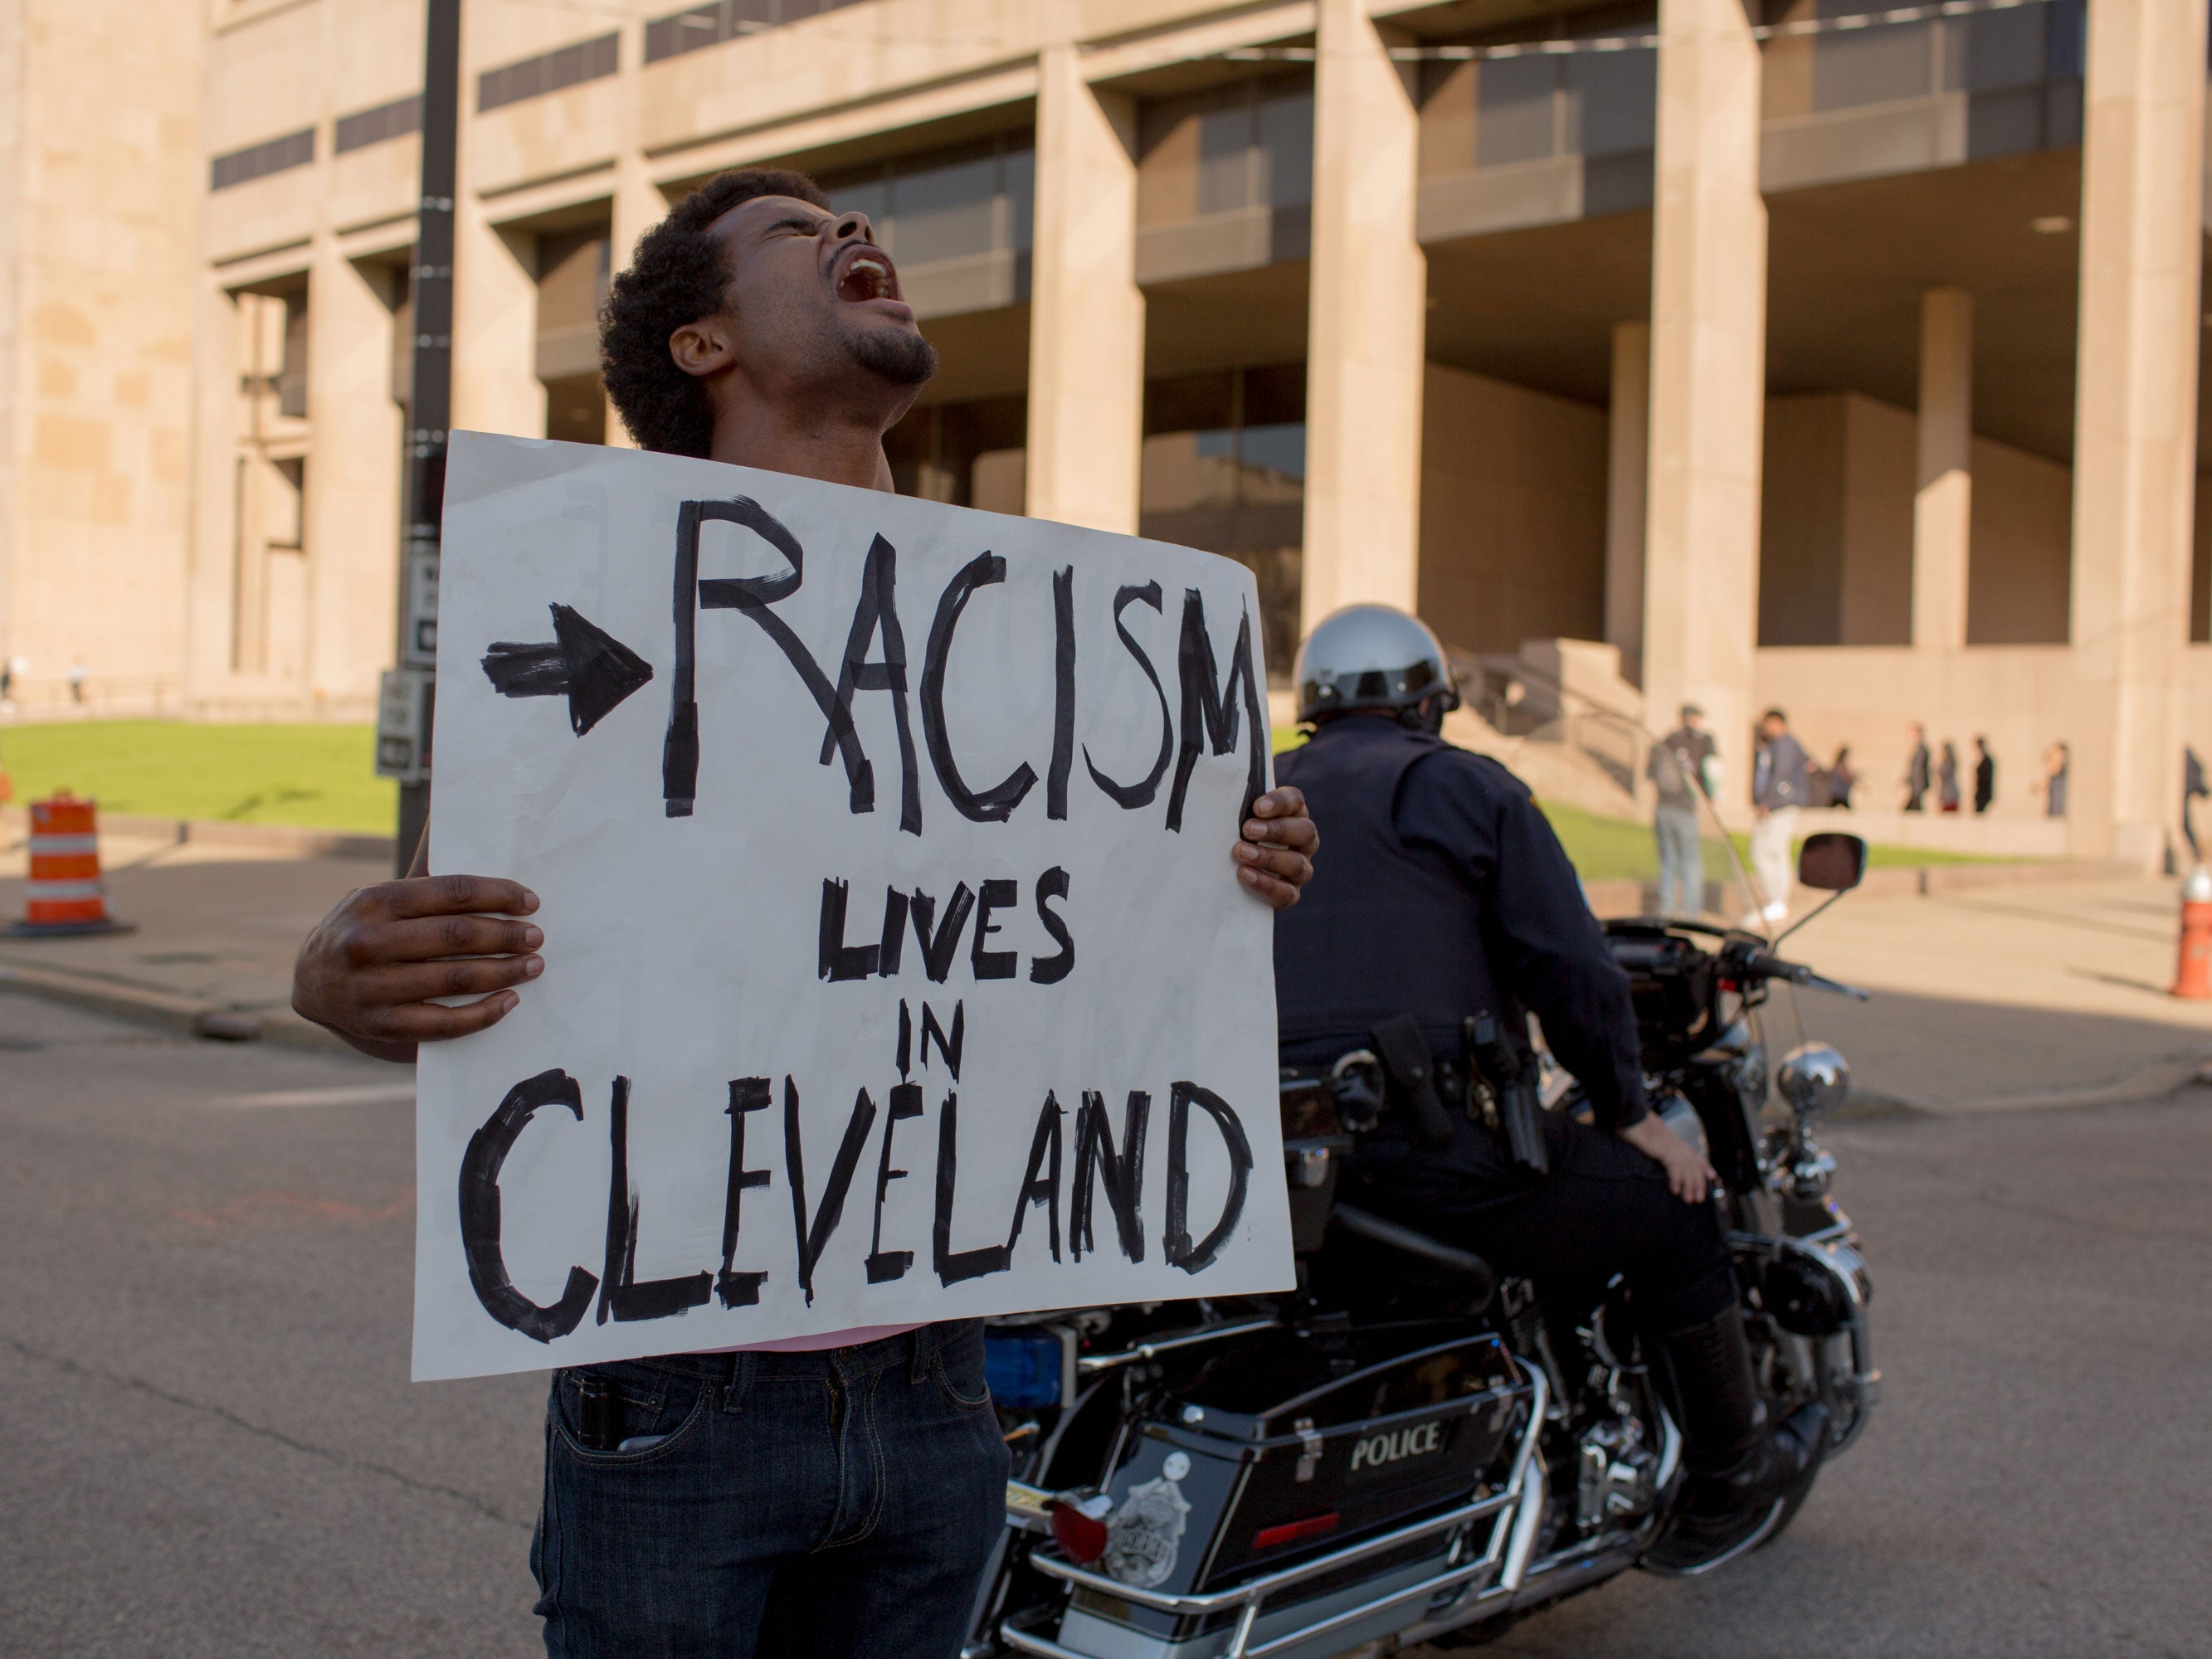 Tanis Quach, of Cleveland, protests in front of the Justice Building in Cleveland, Ohio, against the acquittal of Michael Brelo